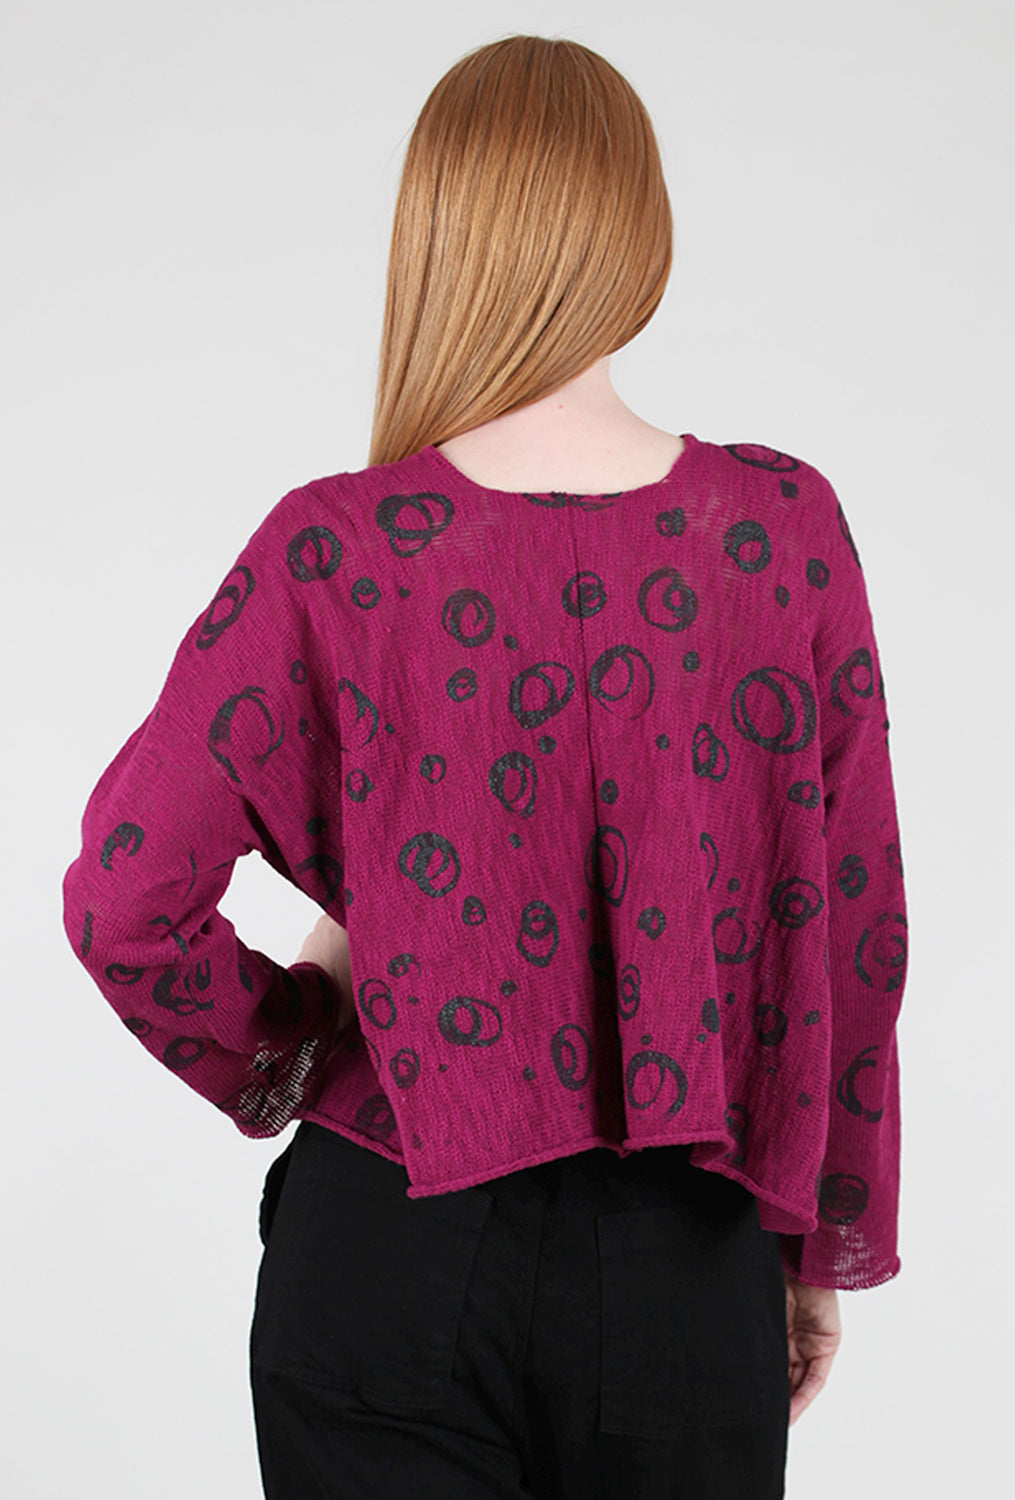 Paper Temples Nelson Sweater, Berry/Circles 